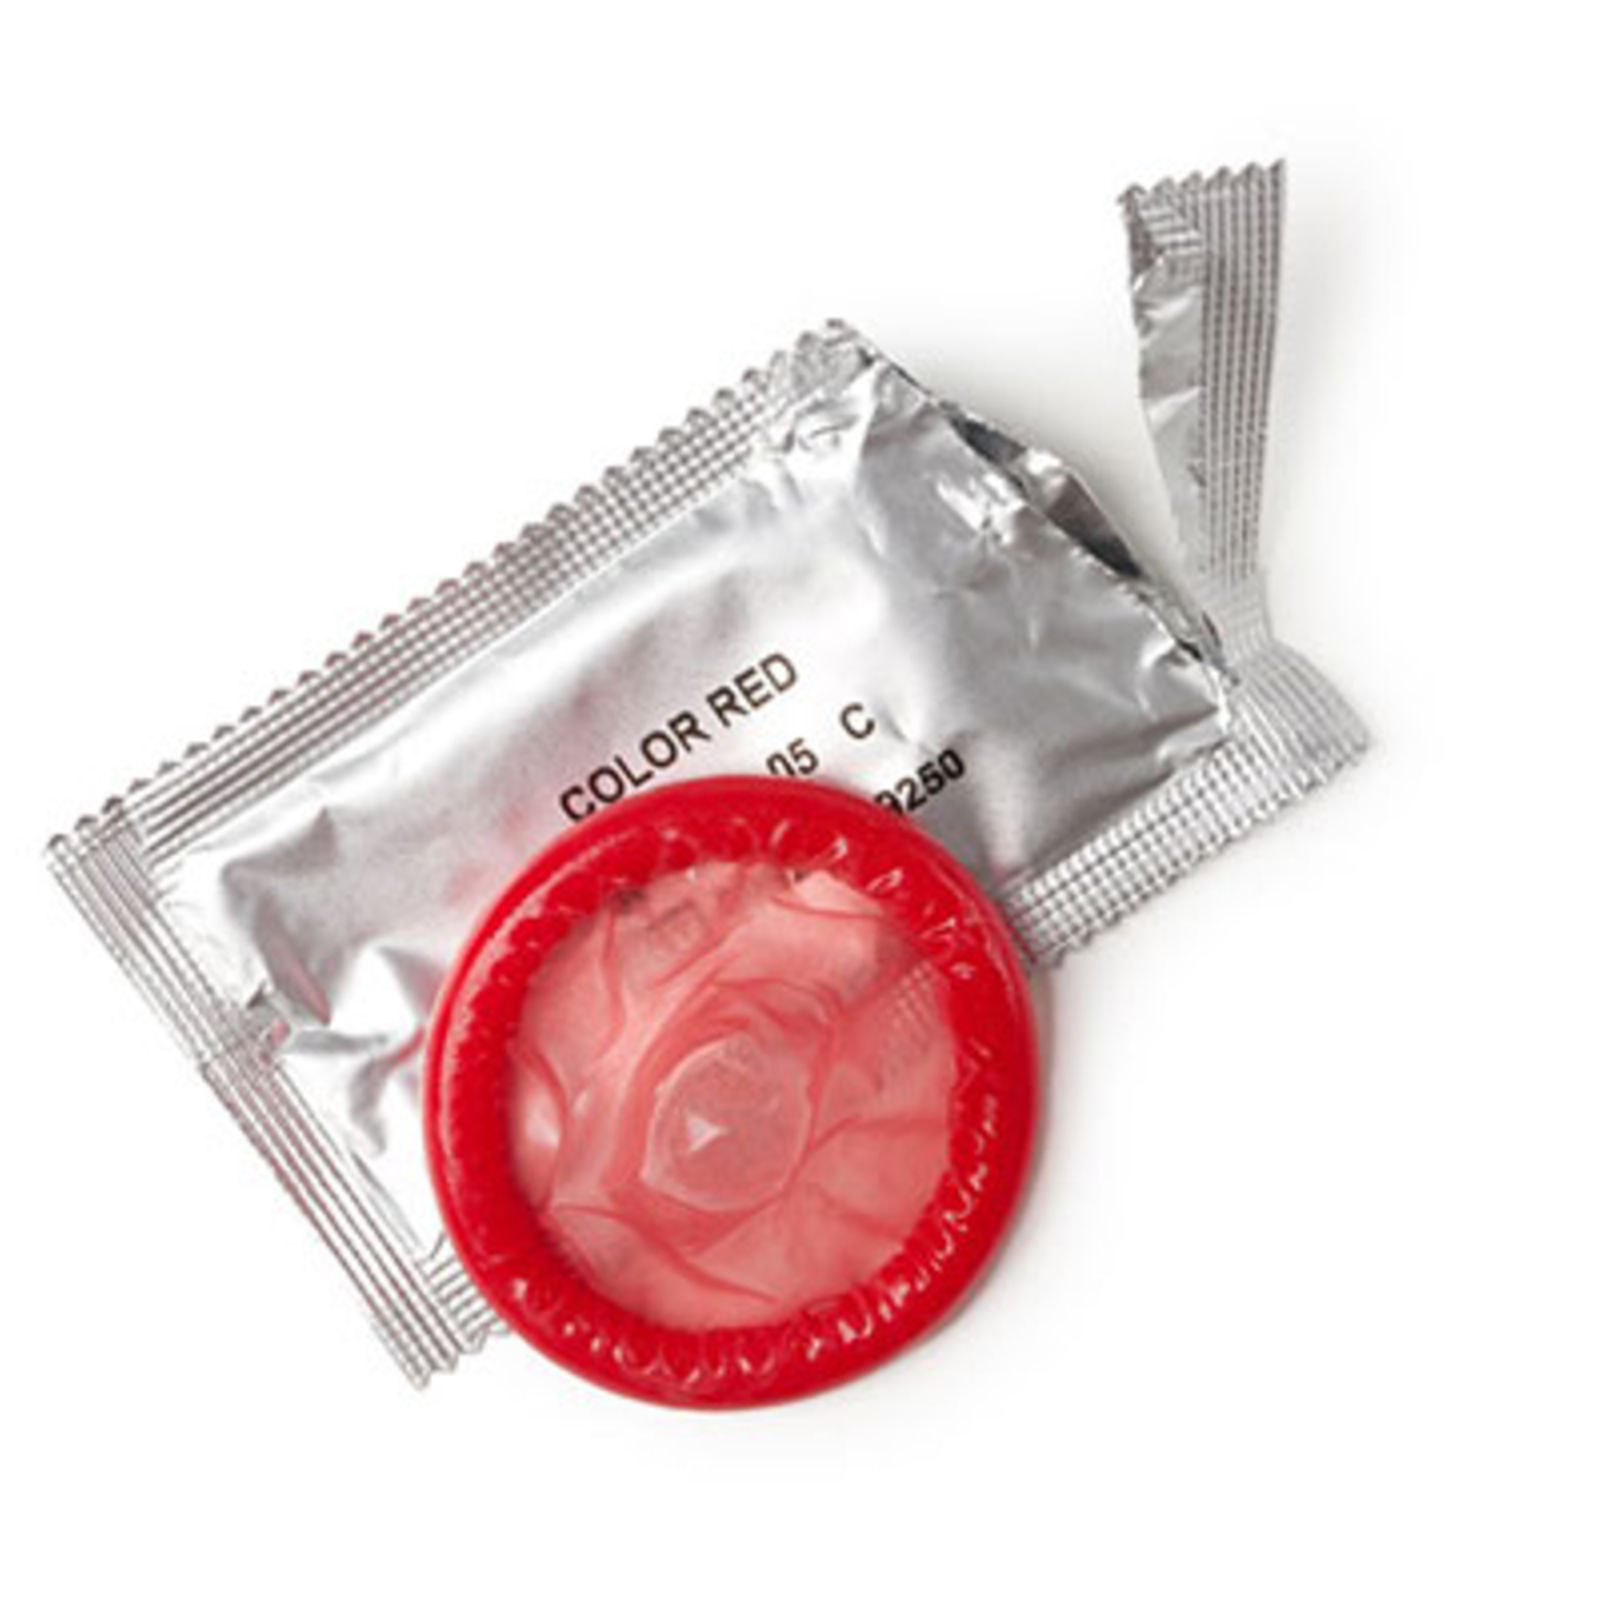 My wife wants us to use condoms Nation photo